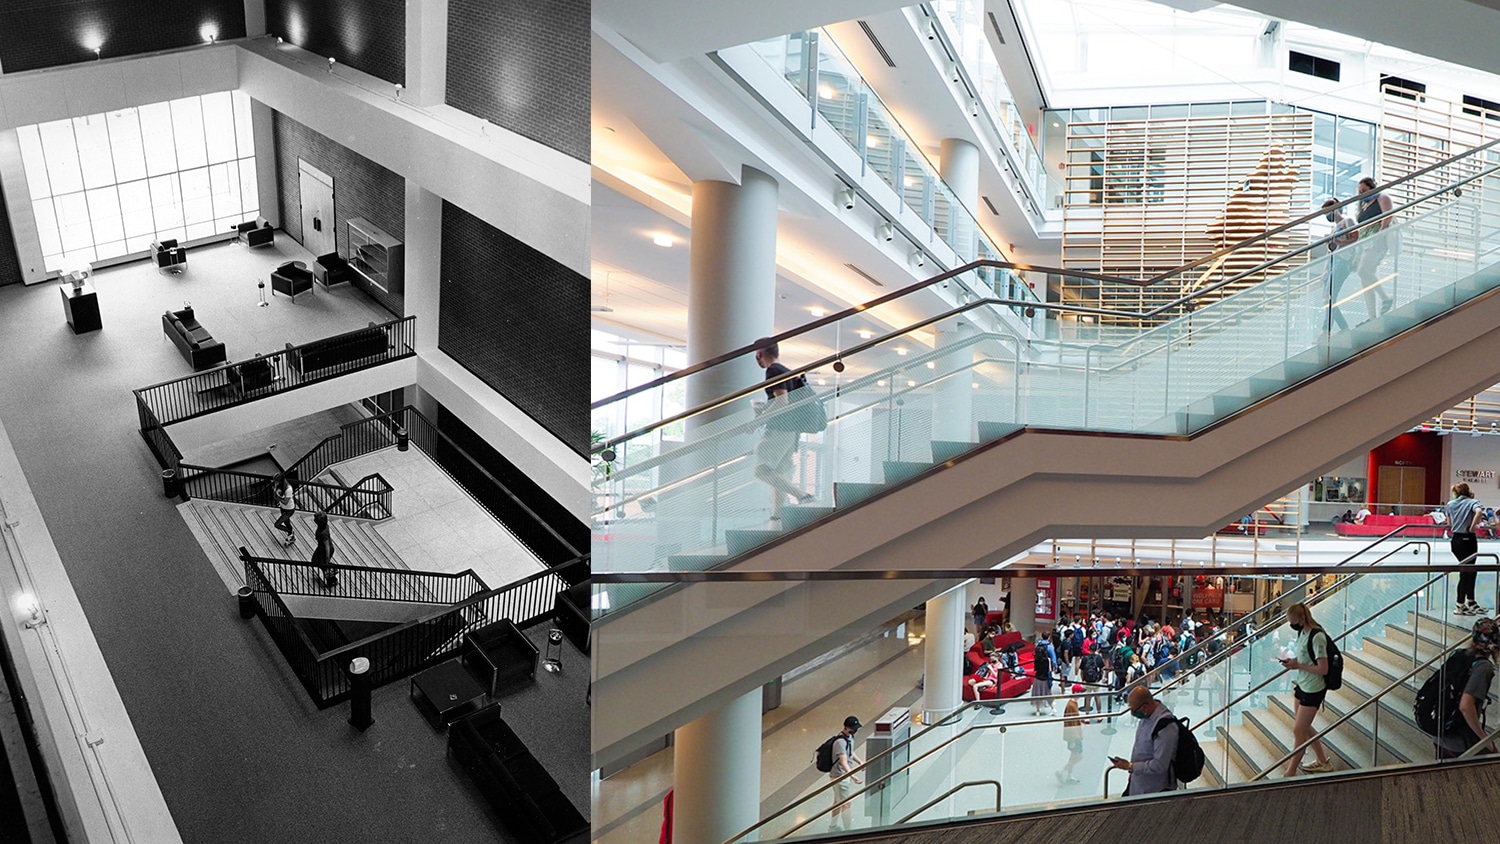 Side-by-side photos show the stairwell of the old student union and the stairwell of today's Talley Student Union.